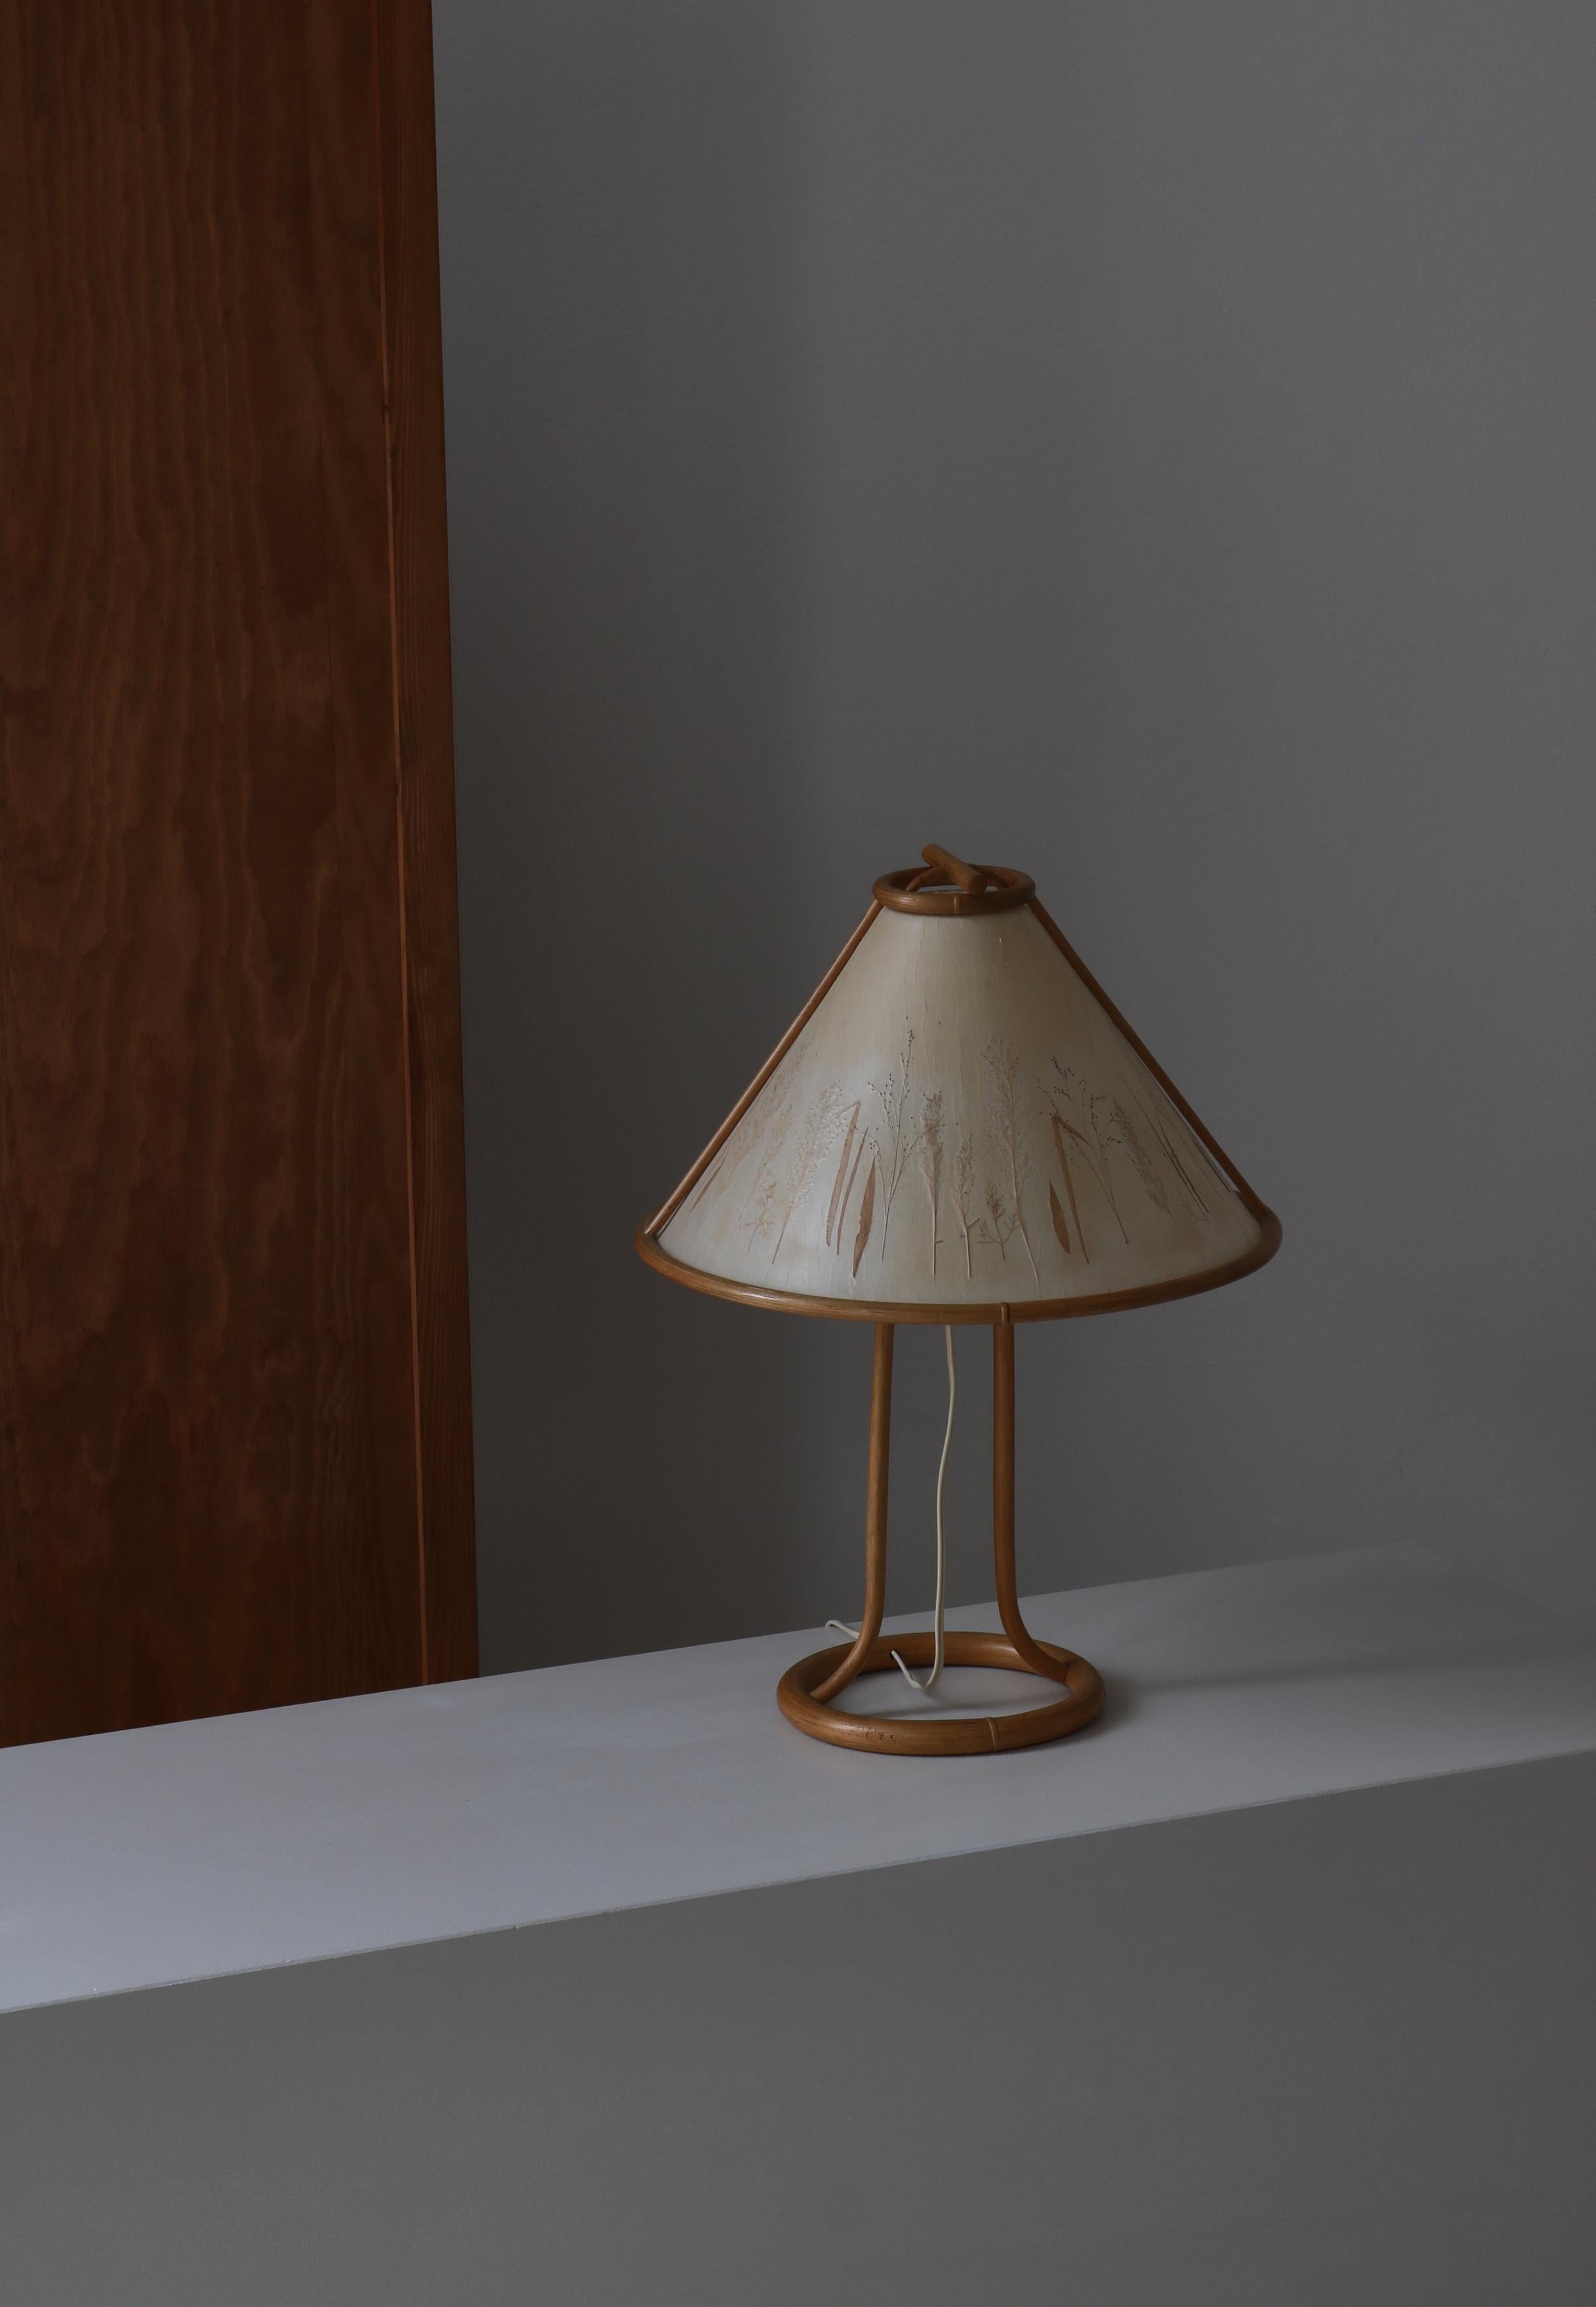 Charming vintage wabi-sabi style table lamp handmade in Denmark in the 1950s. The base is made from bent bamboo and the handmade shade is covered with pergamyn paper and decorated with pressed plants. In the style of Louis Sognot.